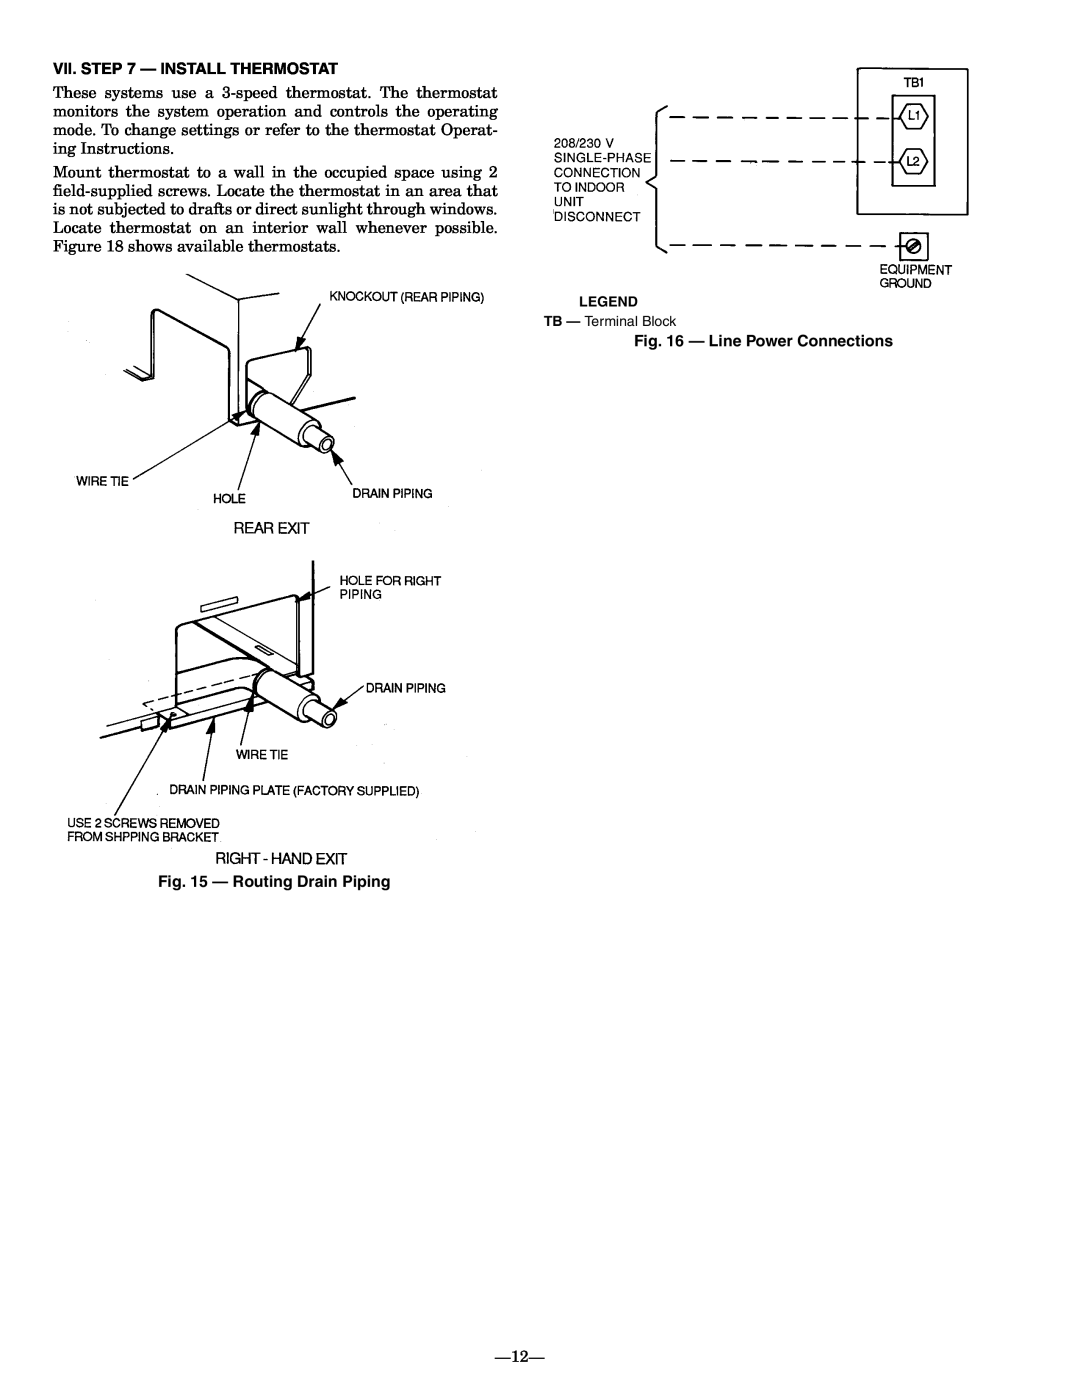 Bryant 619CNF, 619CNQ installation instructions Vii. — Install Thermostat, Line Power Connections, Routing Drain Piping 